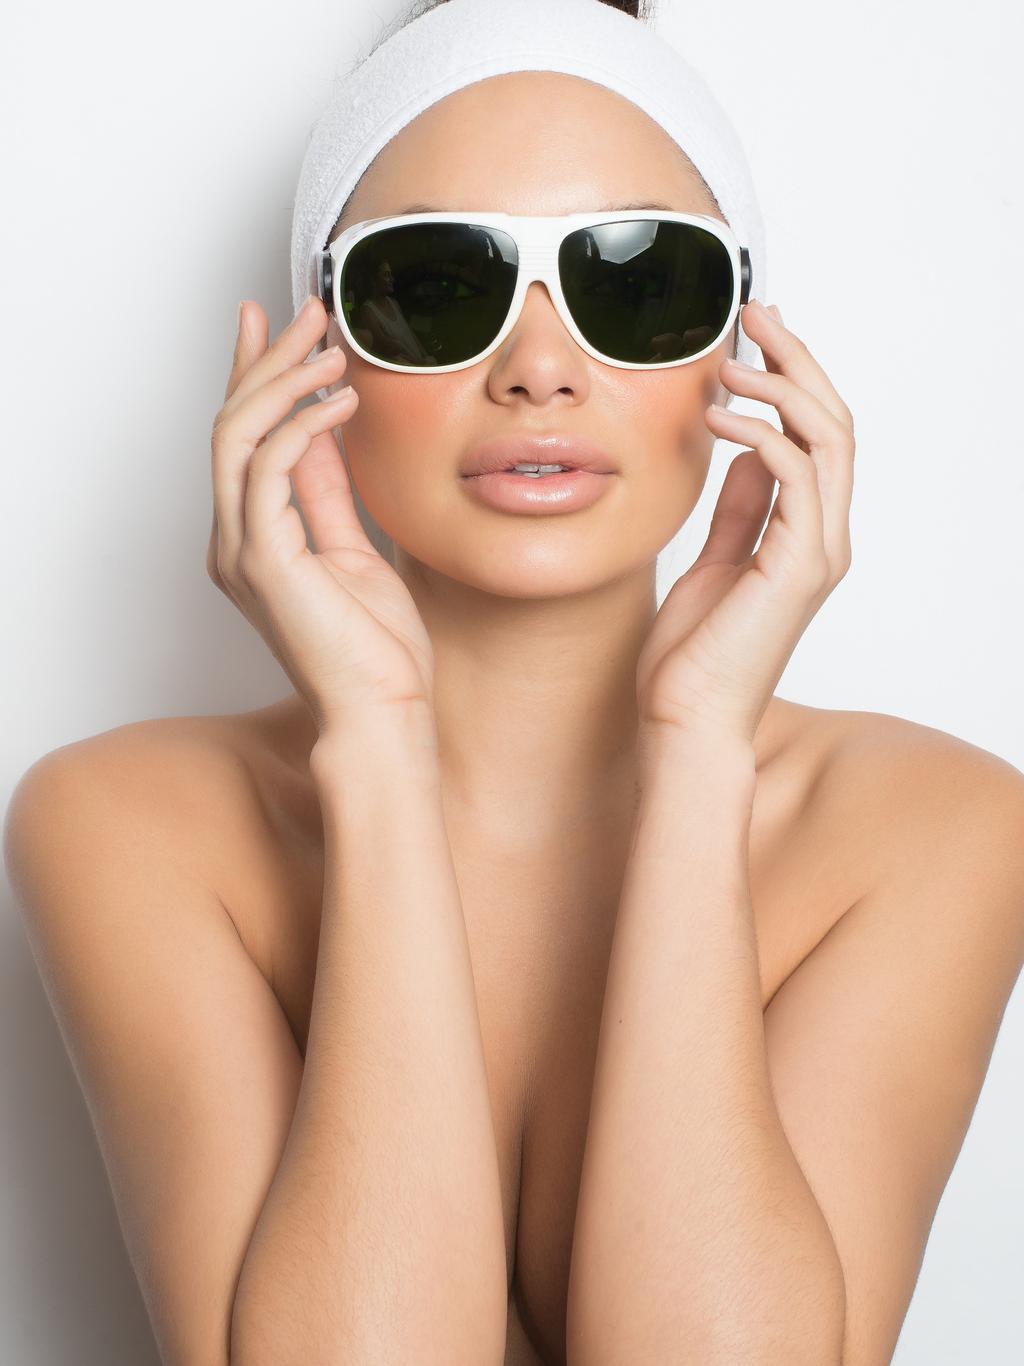 Boutique, our priority is listening to what you would like to change about your appearance and understanding your needs. Come in for your consultation.